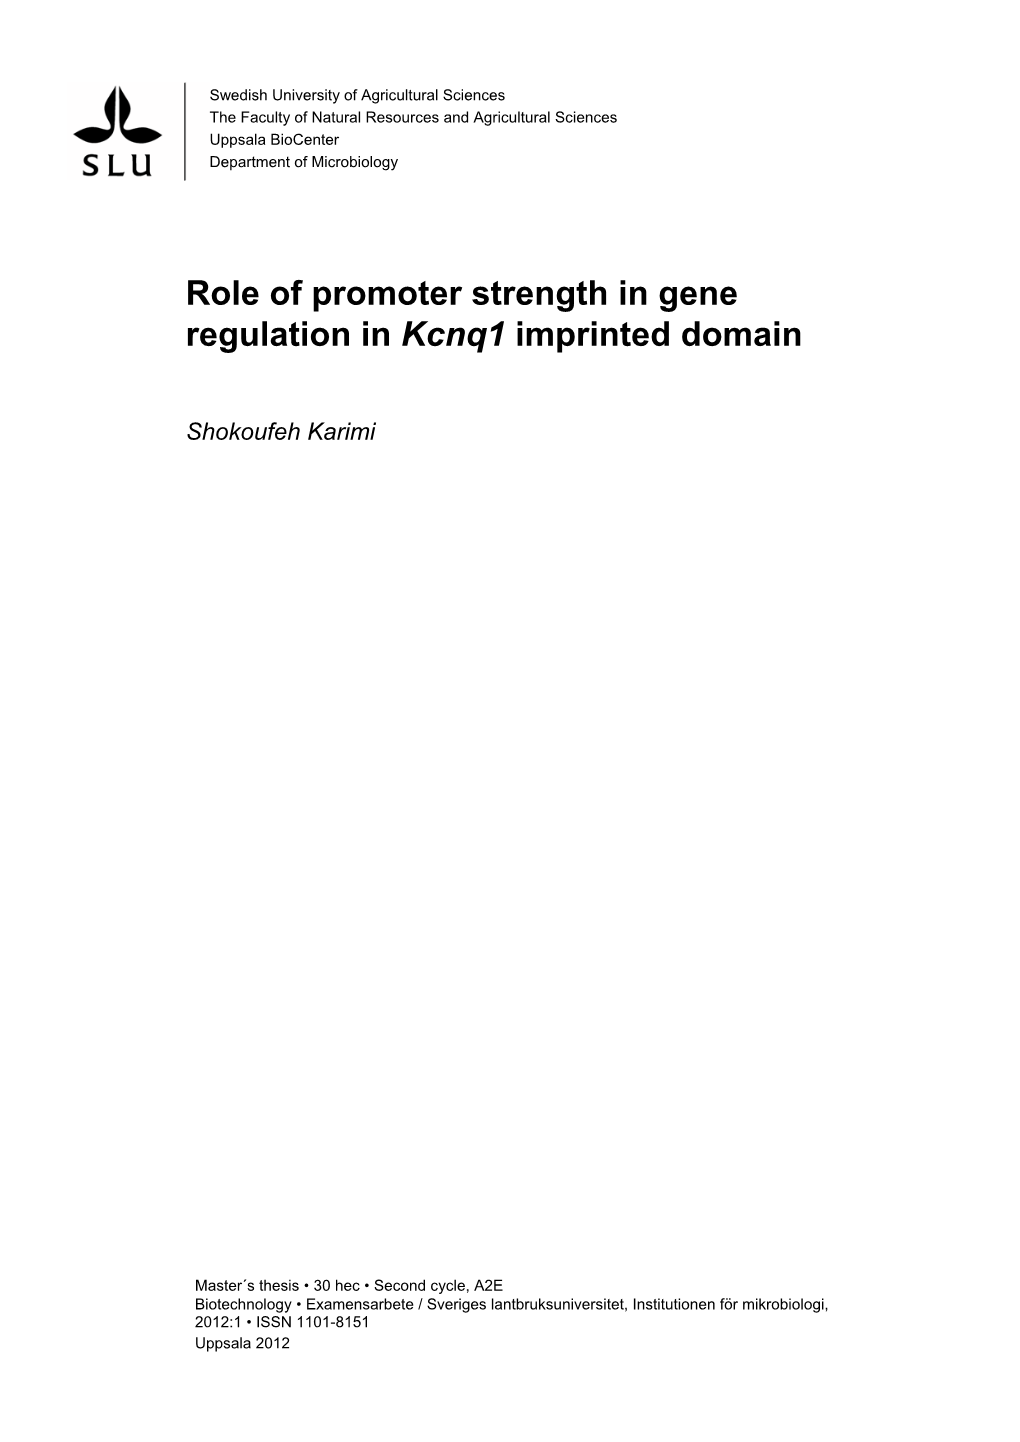 Role of Promoter Strength in Gene Regulation in Kcnq1 Imprinted Domain